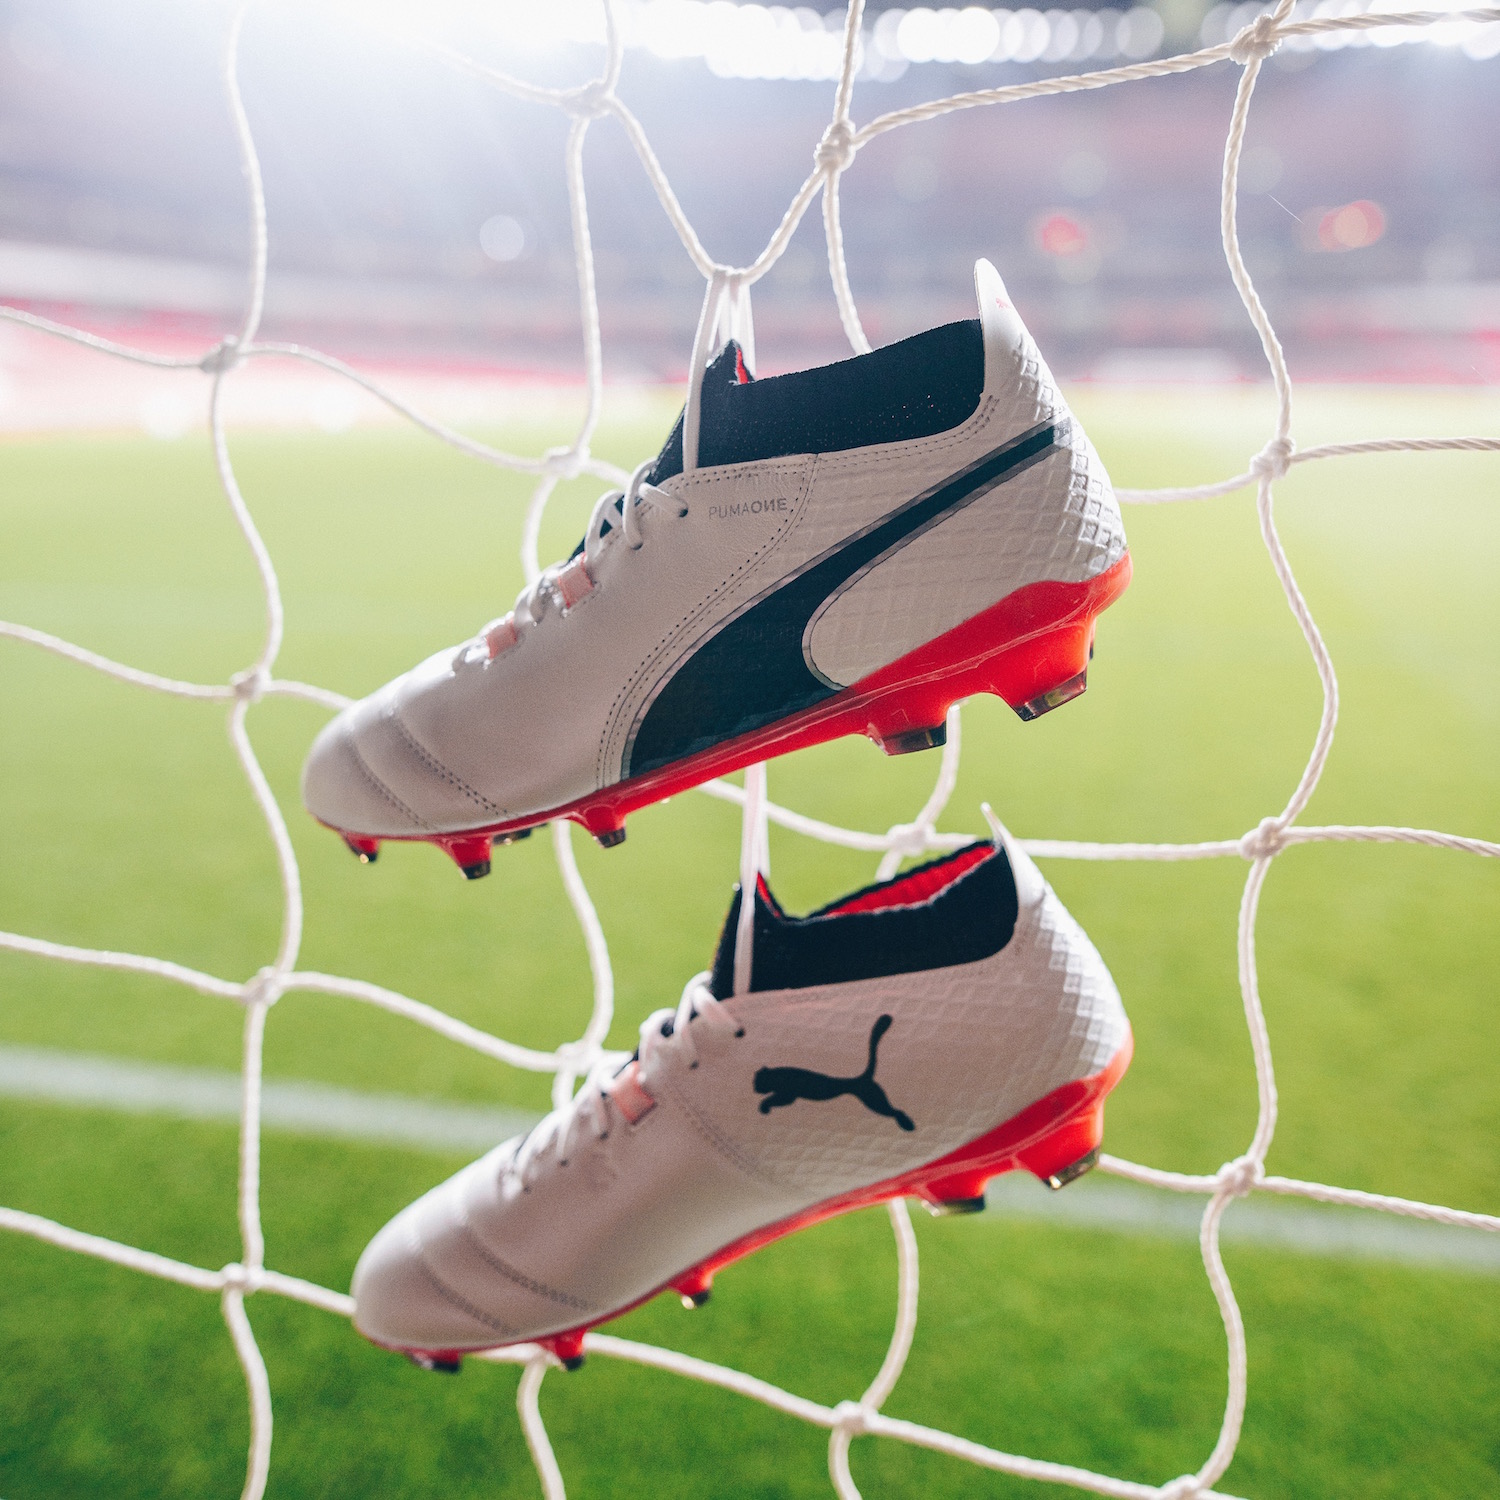 Unveils its First Puma One Soccer Boot 